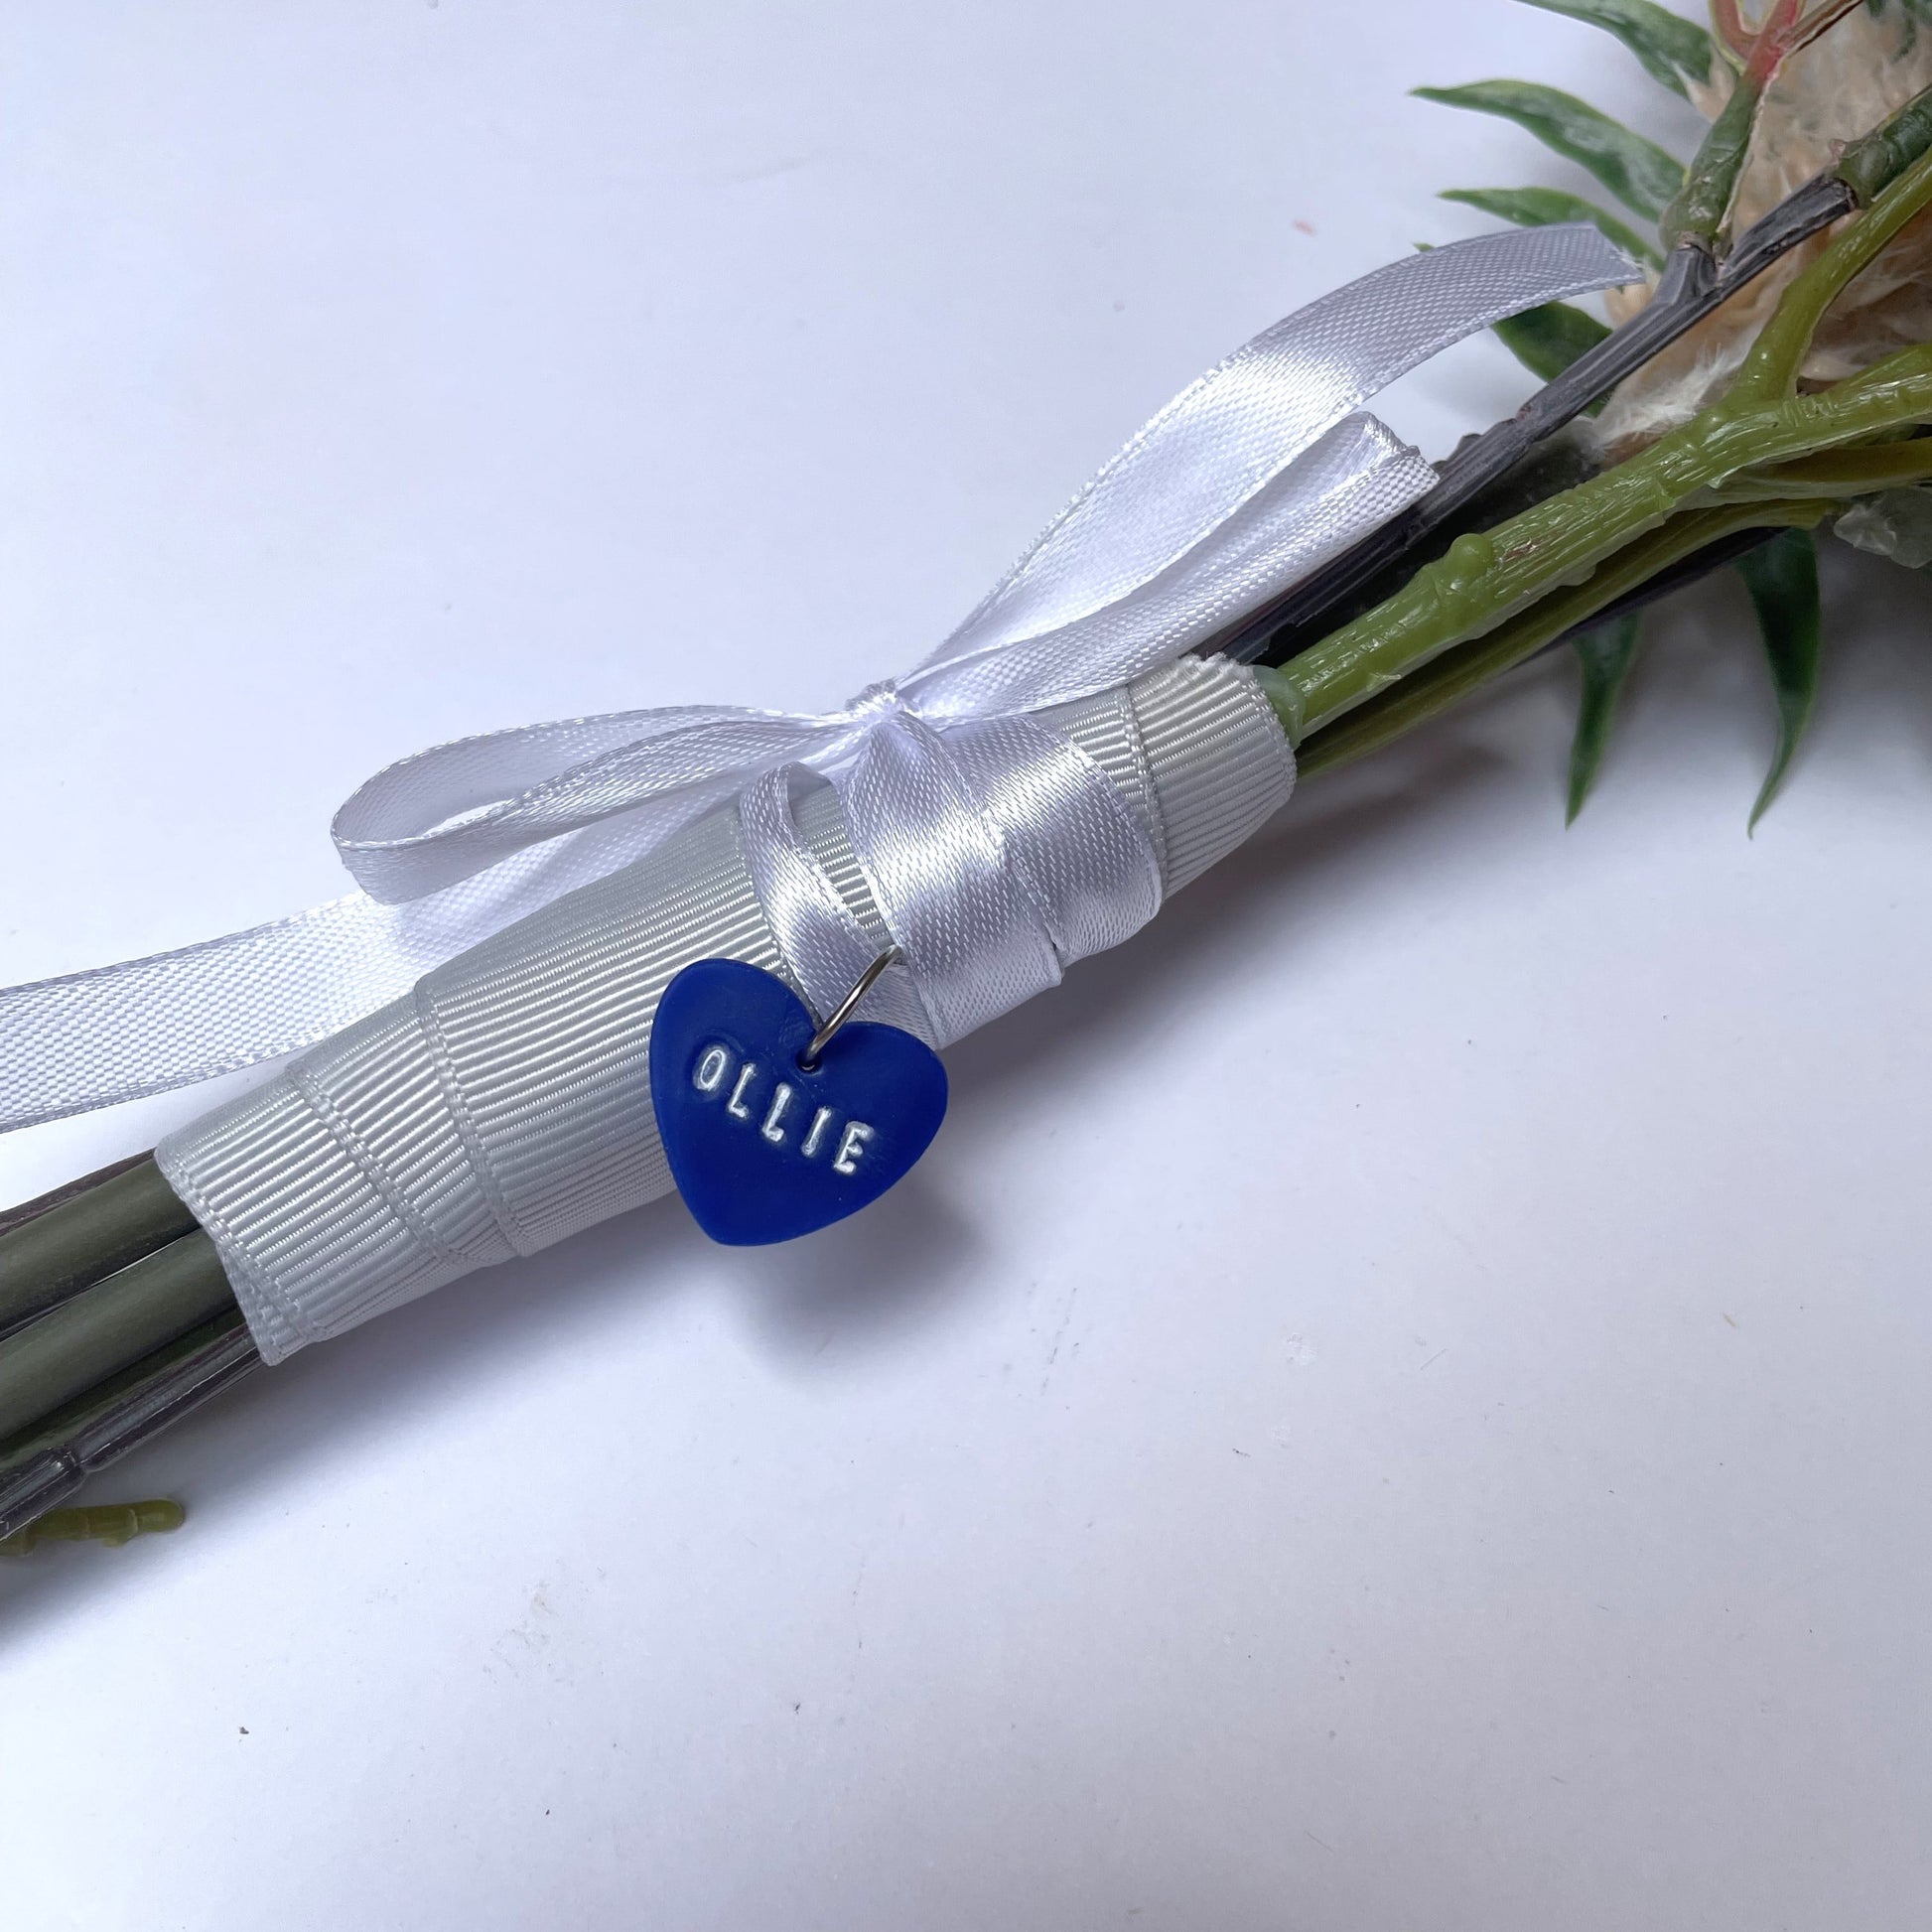 Blue heart bouquet accessory on ribbon around stems, with white name 'Ollie' imprinted in white.